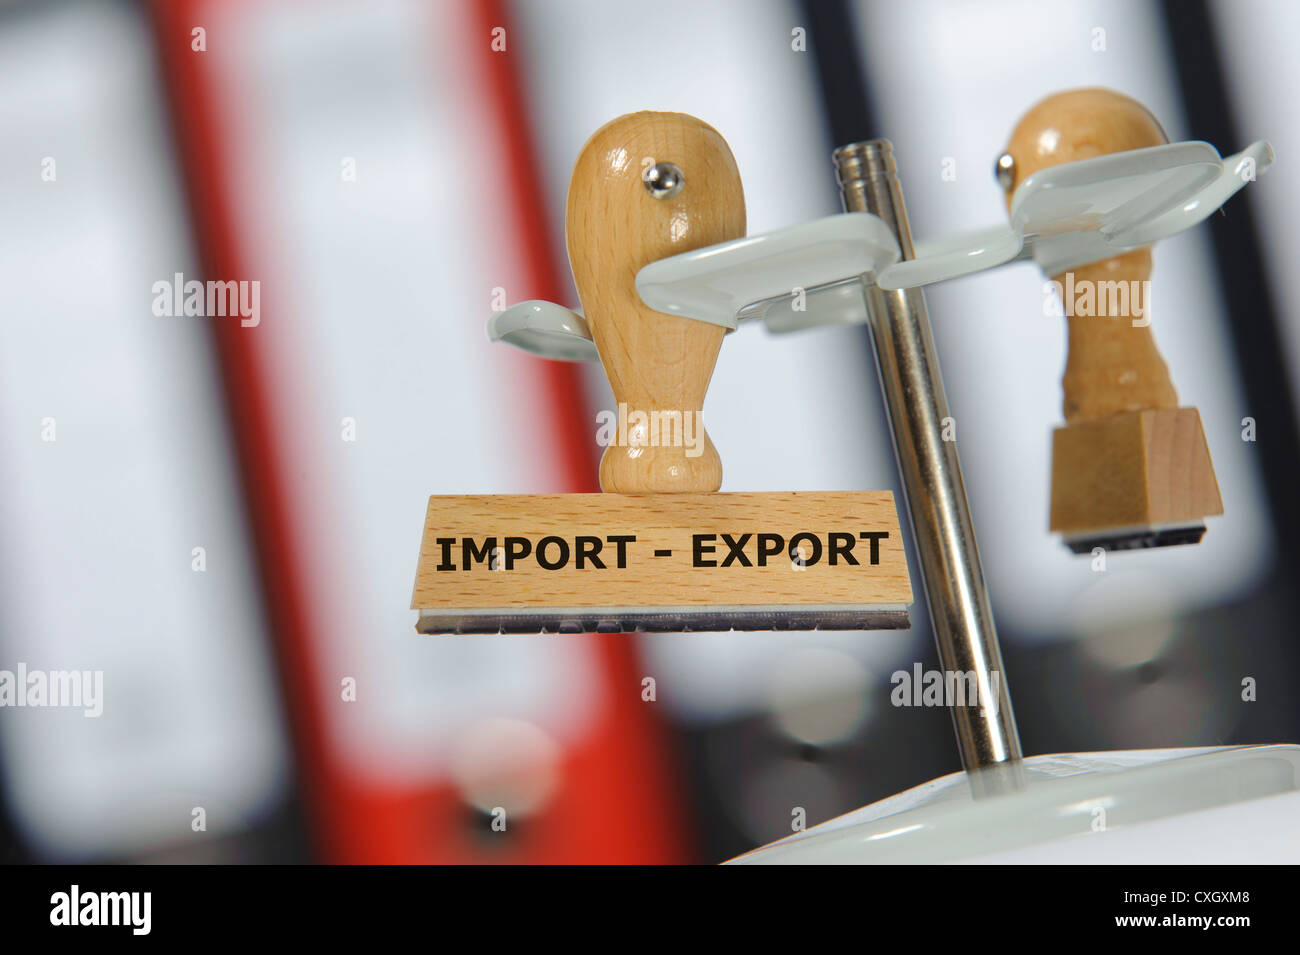 rubber stamp marked with import - export Stock Photo